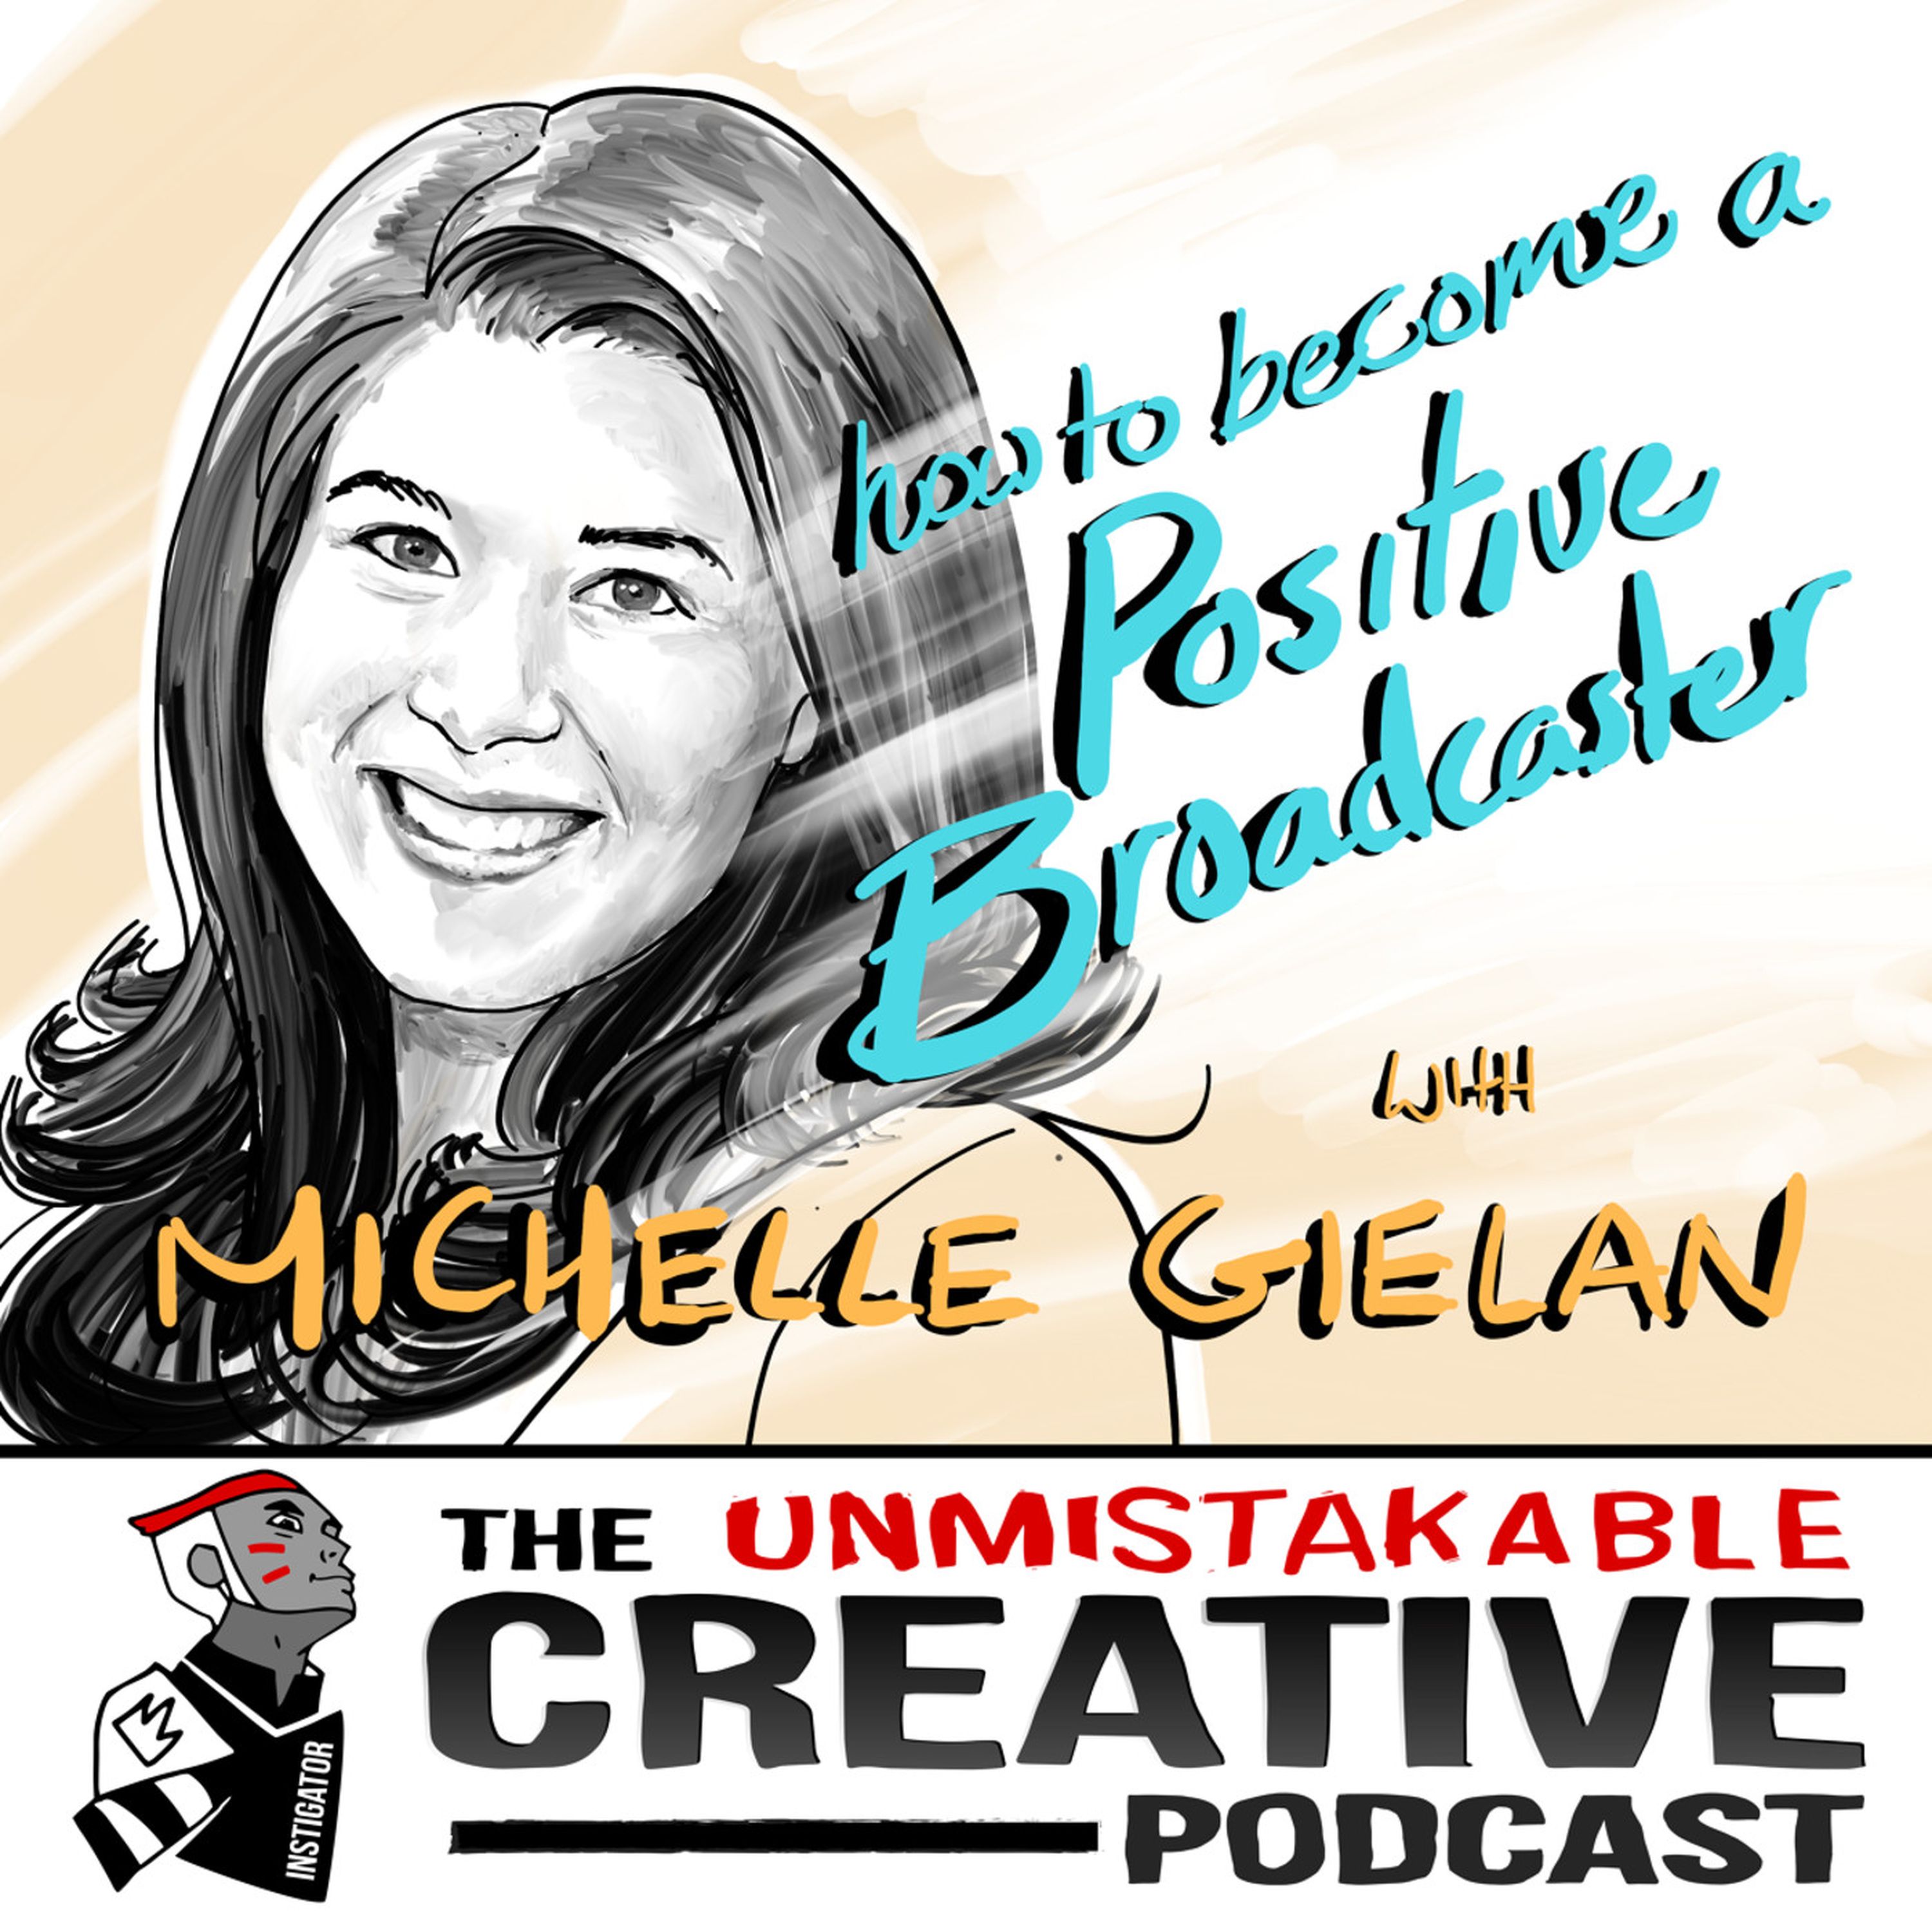 Best of: How to Become a Positive Broadcaster with Michelle Gielan